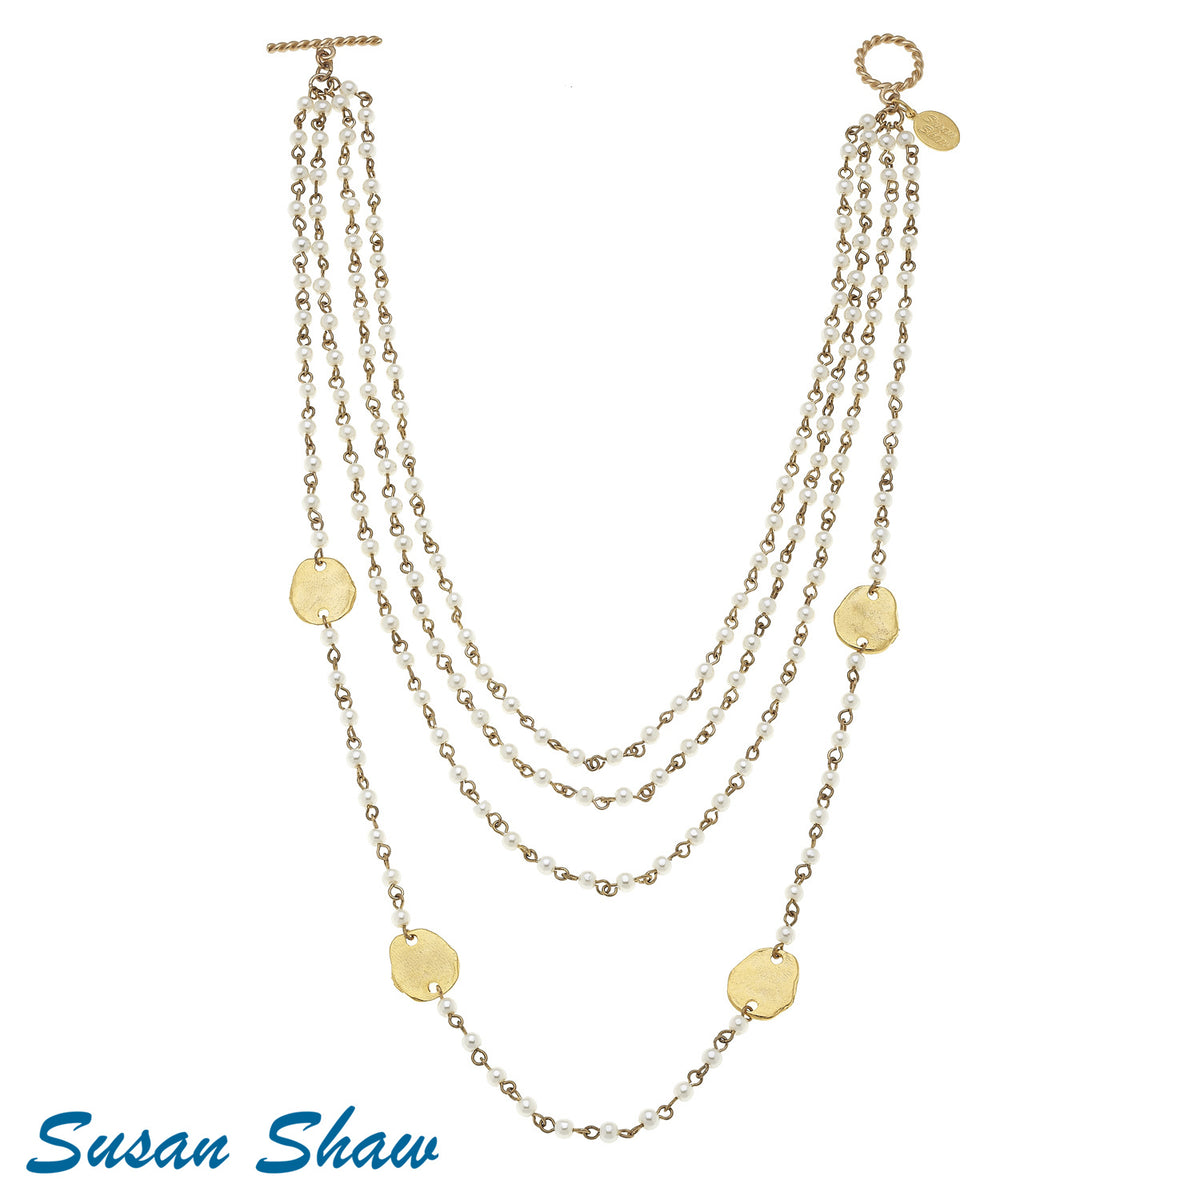 SUSAN SHAW MULTISTRAND PEARL + CIRCLE NECKLACE